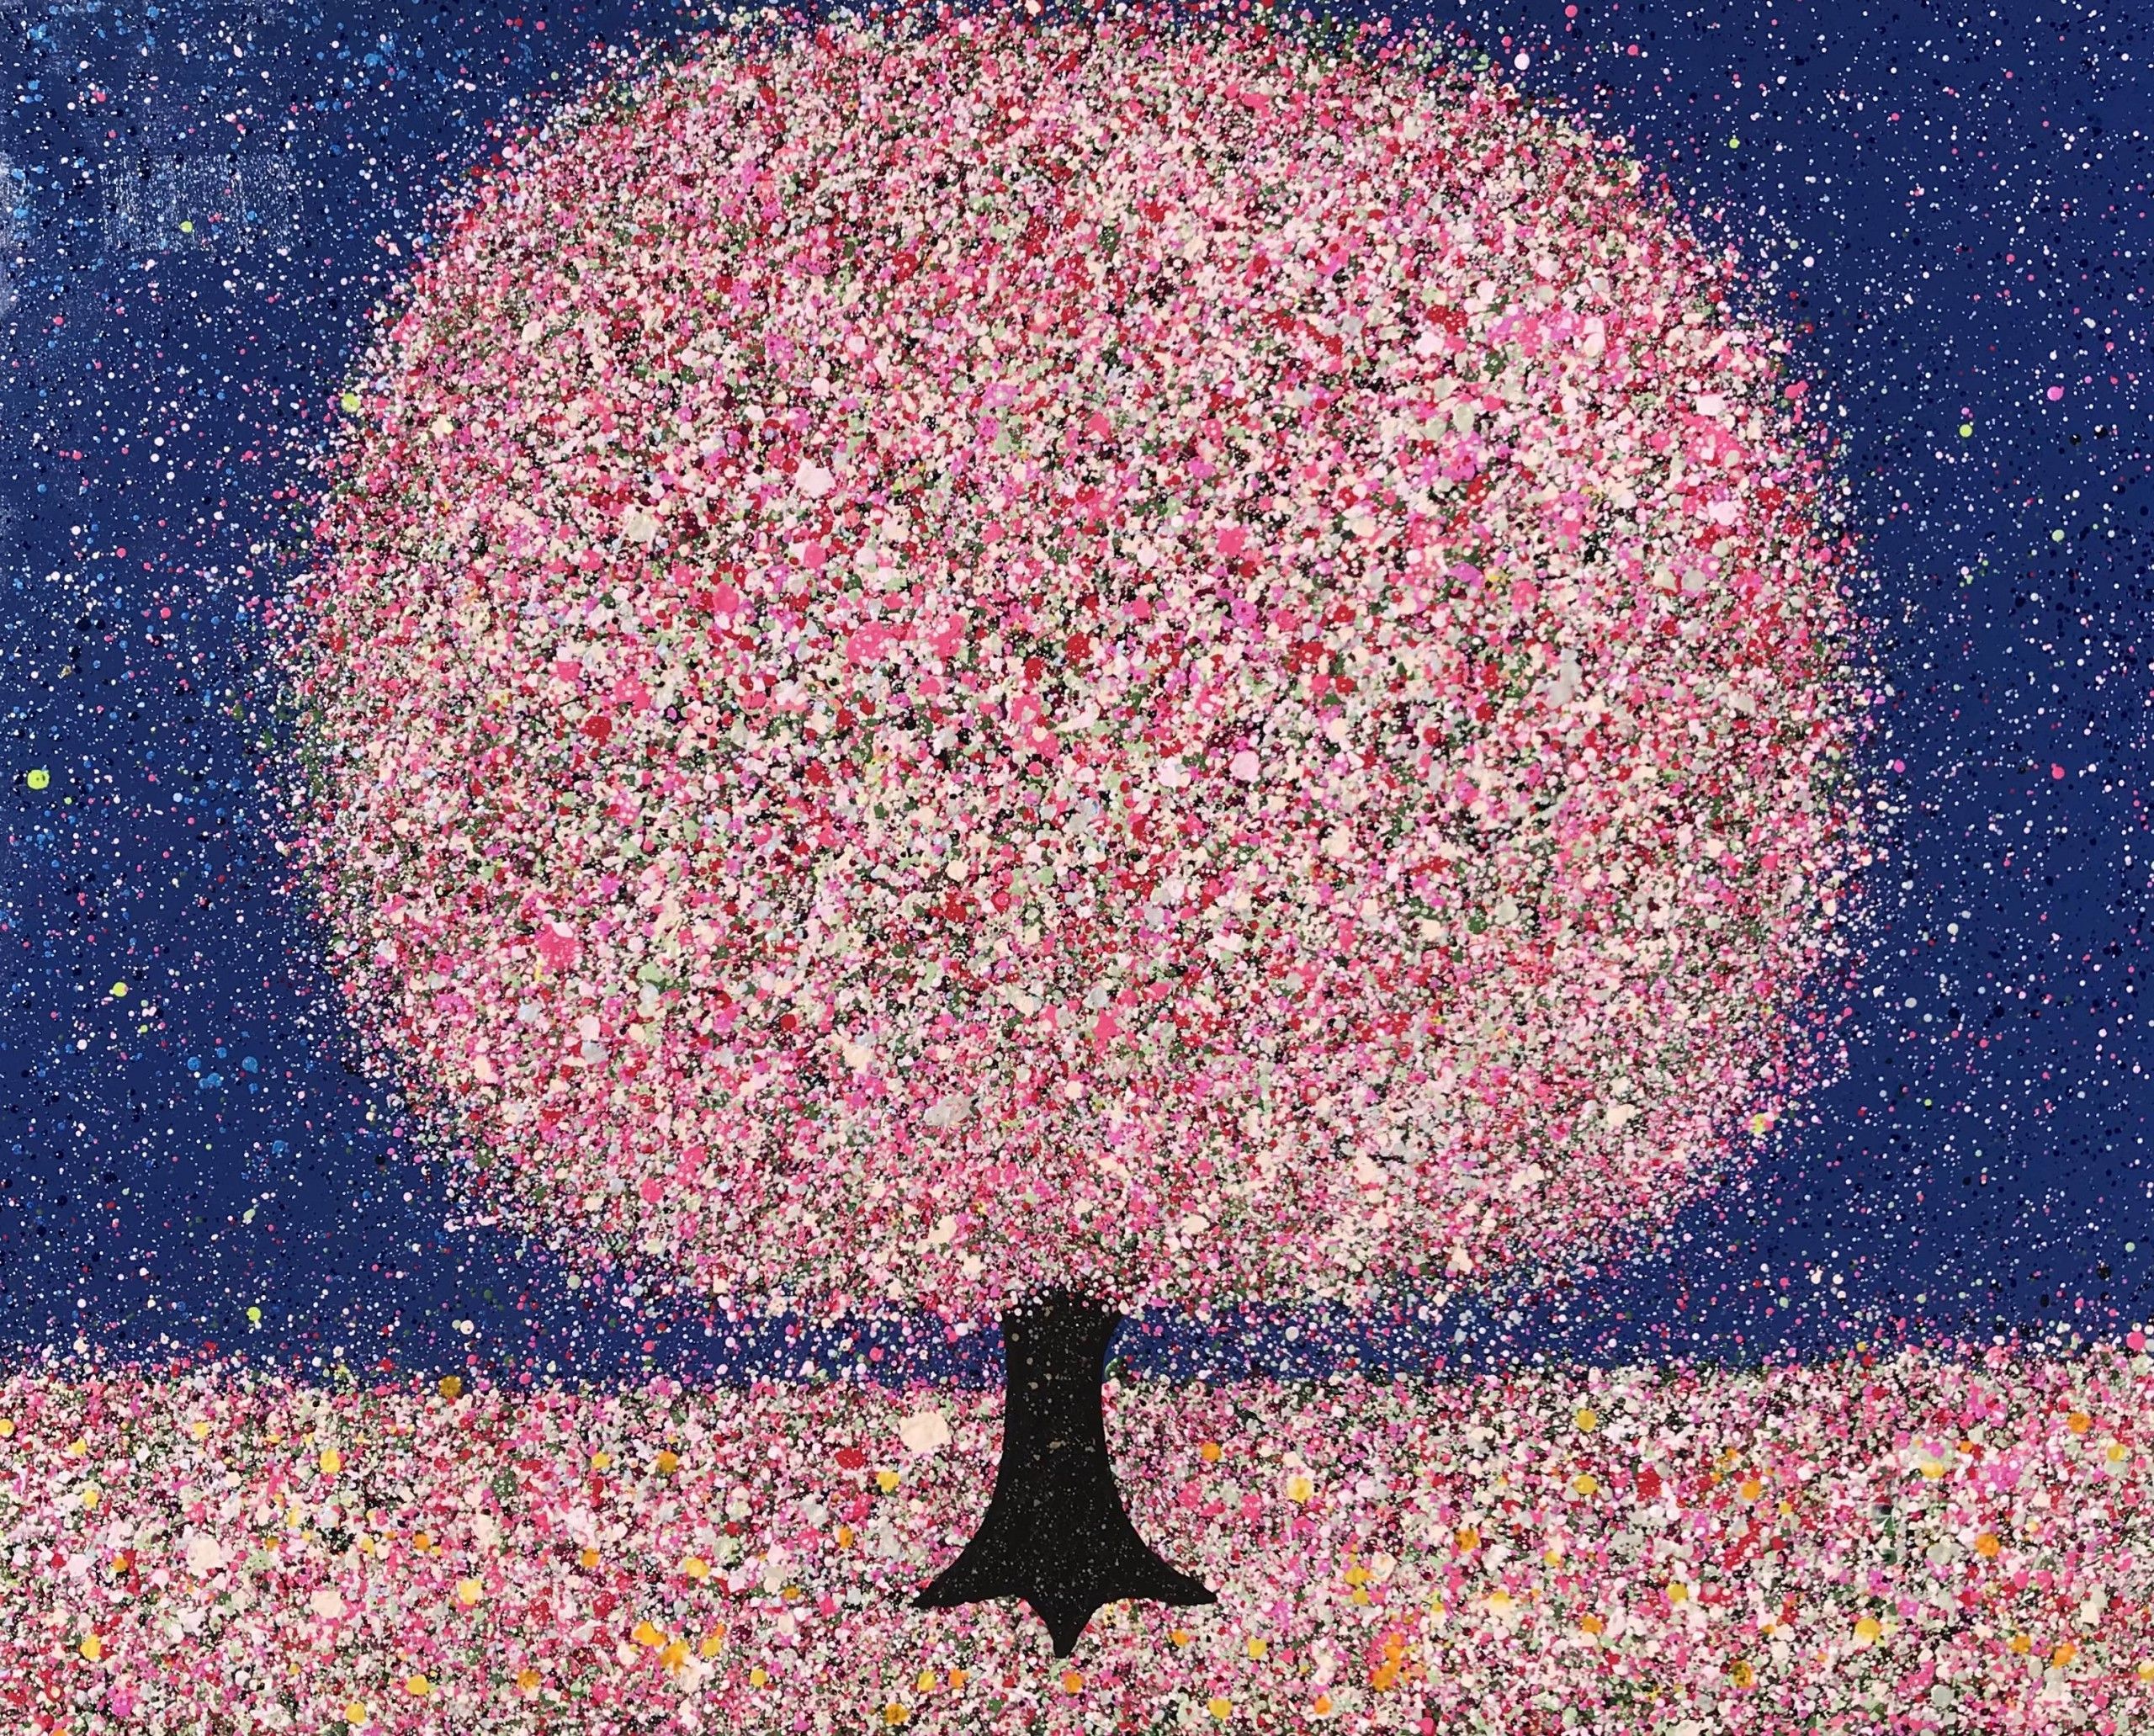 Cherry Blossom and Moonlight by Nicky Chubb